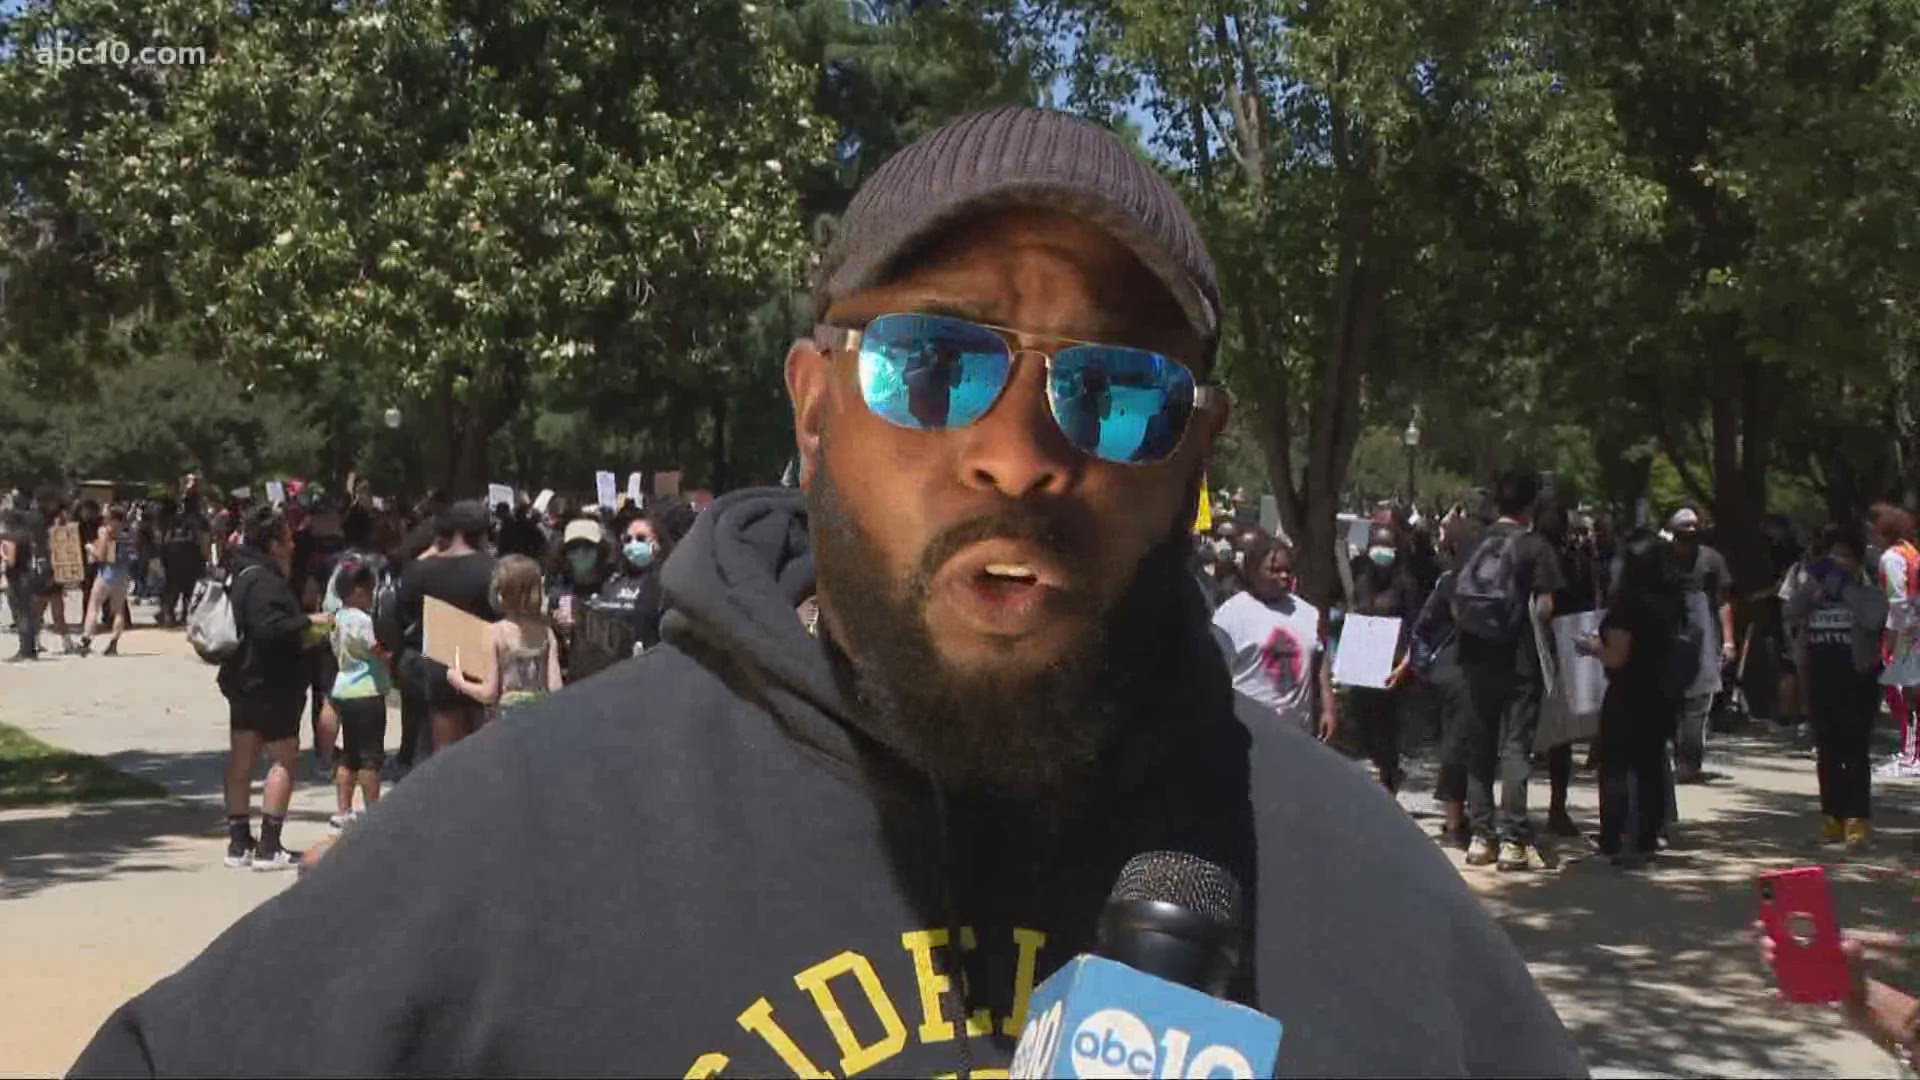 Actor Christopher Michael Holley talks with Mark S. Allen at the Sacramento Peace March about the need for change, saying, "this is just the beginning."